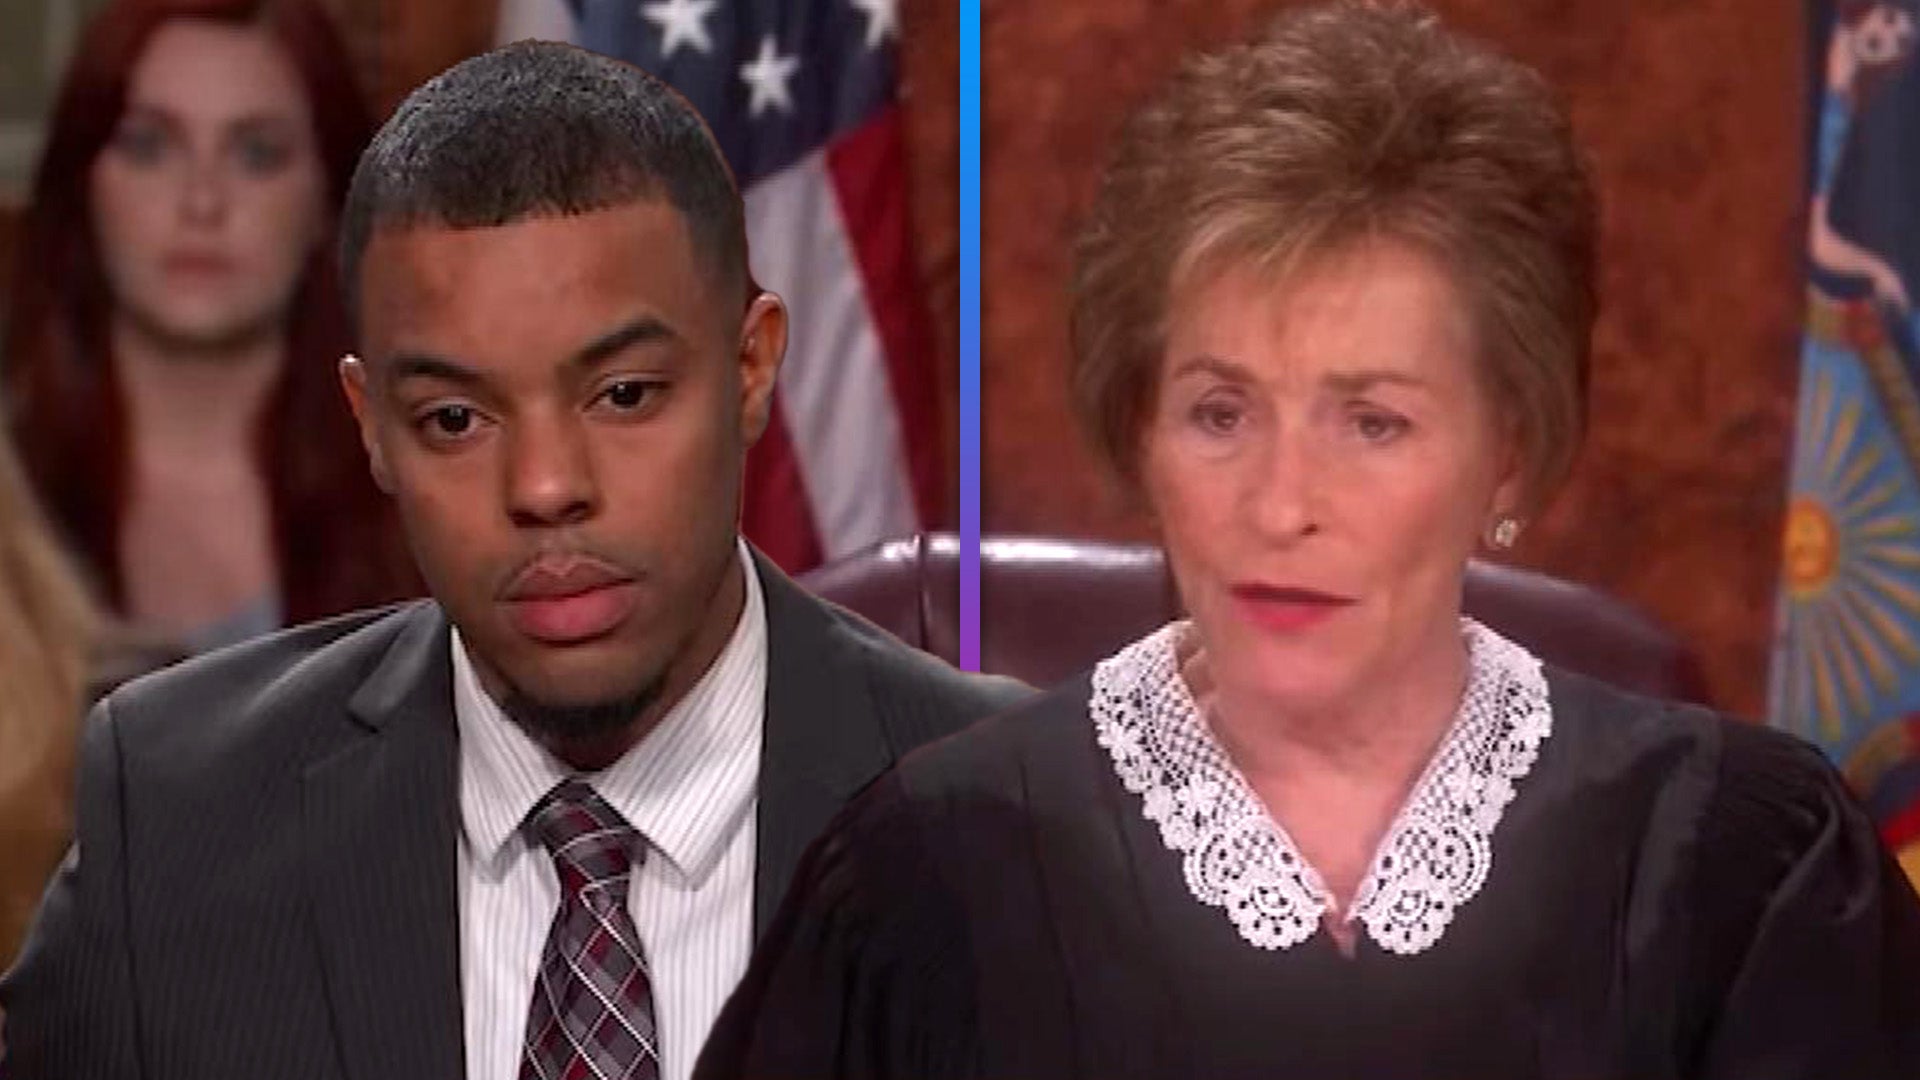 Former ‘Judge Judy’ Plaintiff Has Been Accused of Holding Woman in Cinderblock Cell